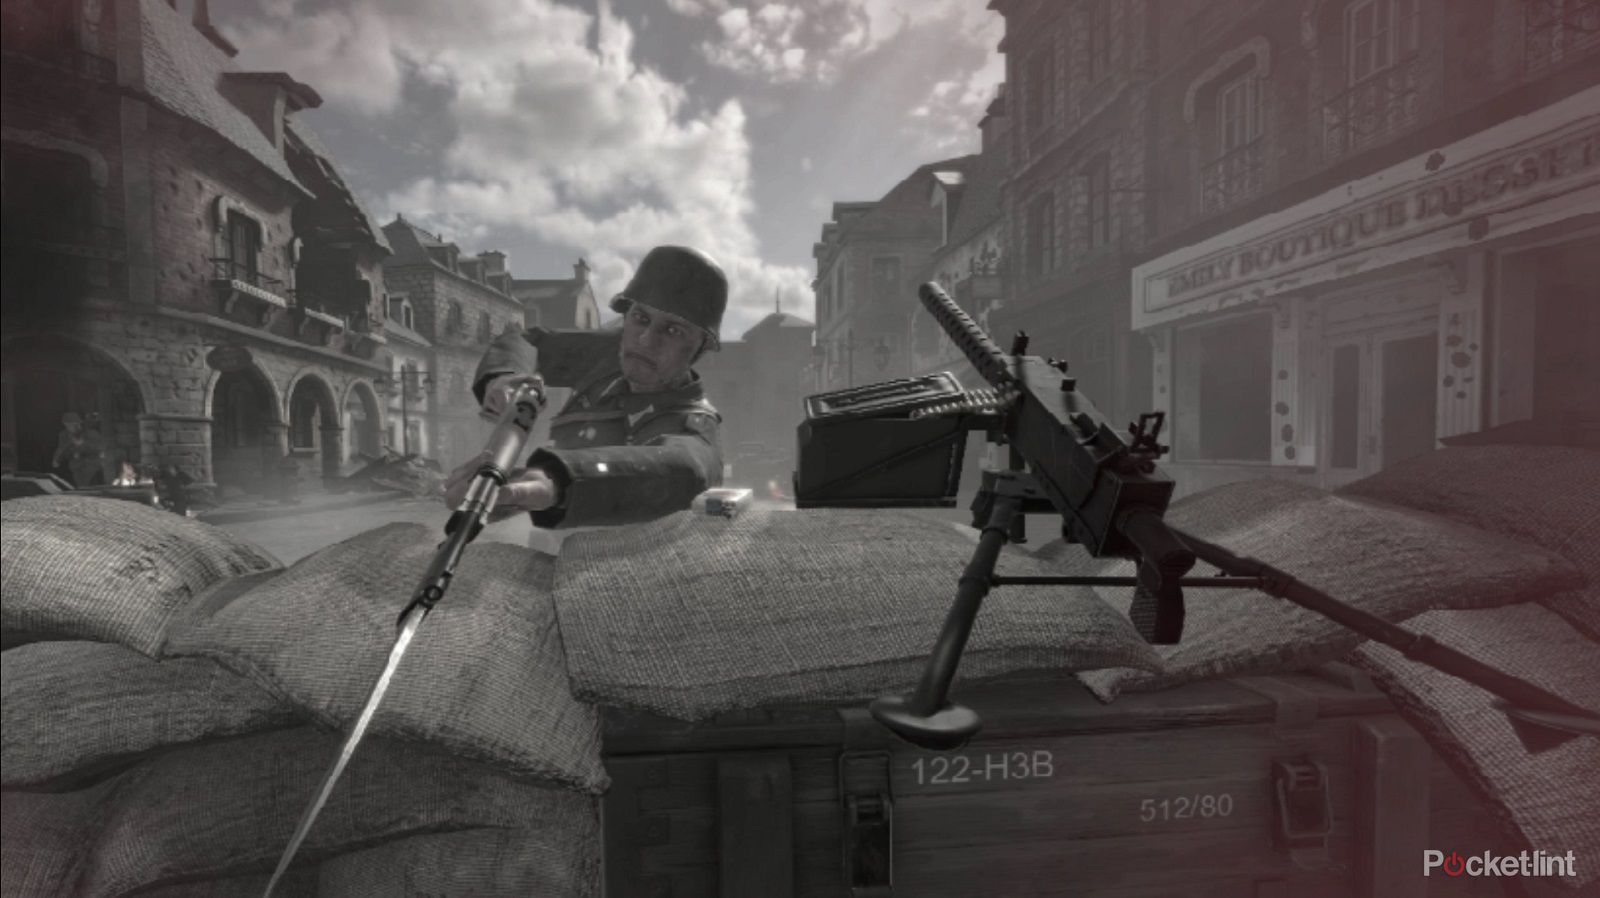 Front defense ww2 vr review image 3